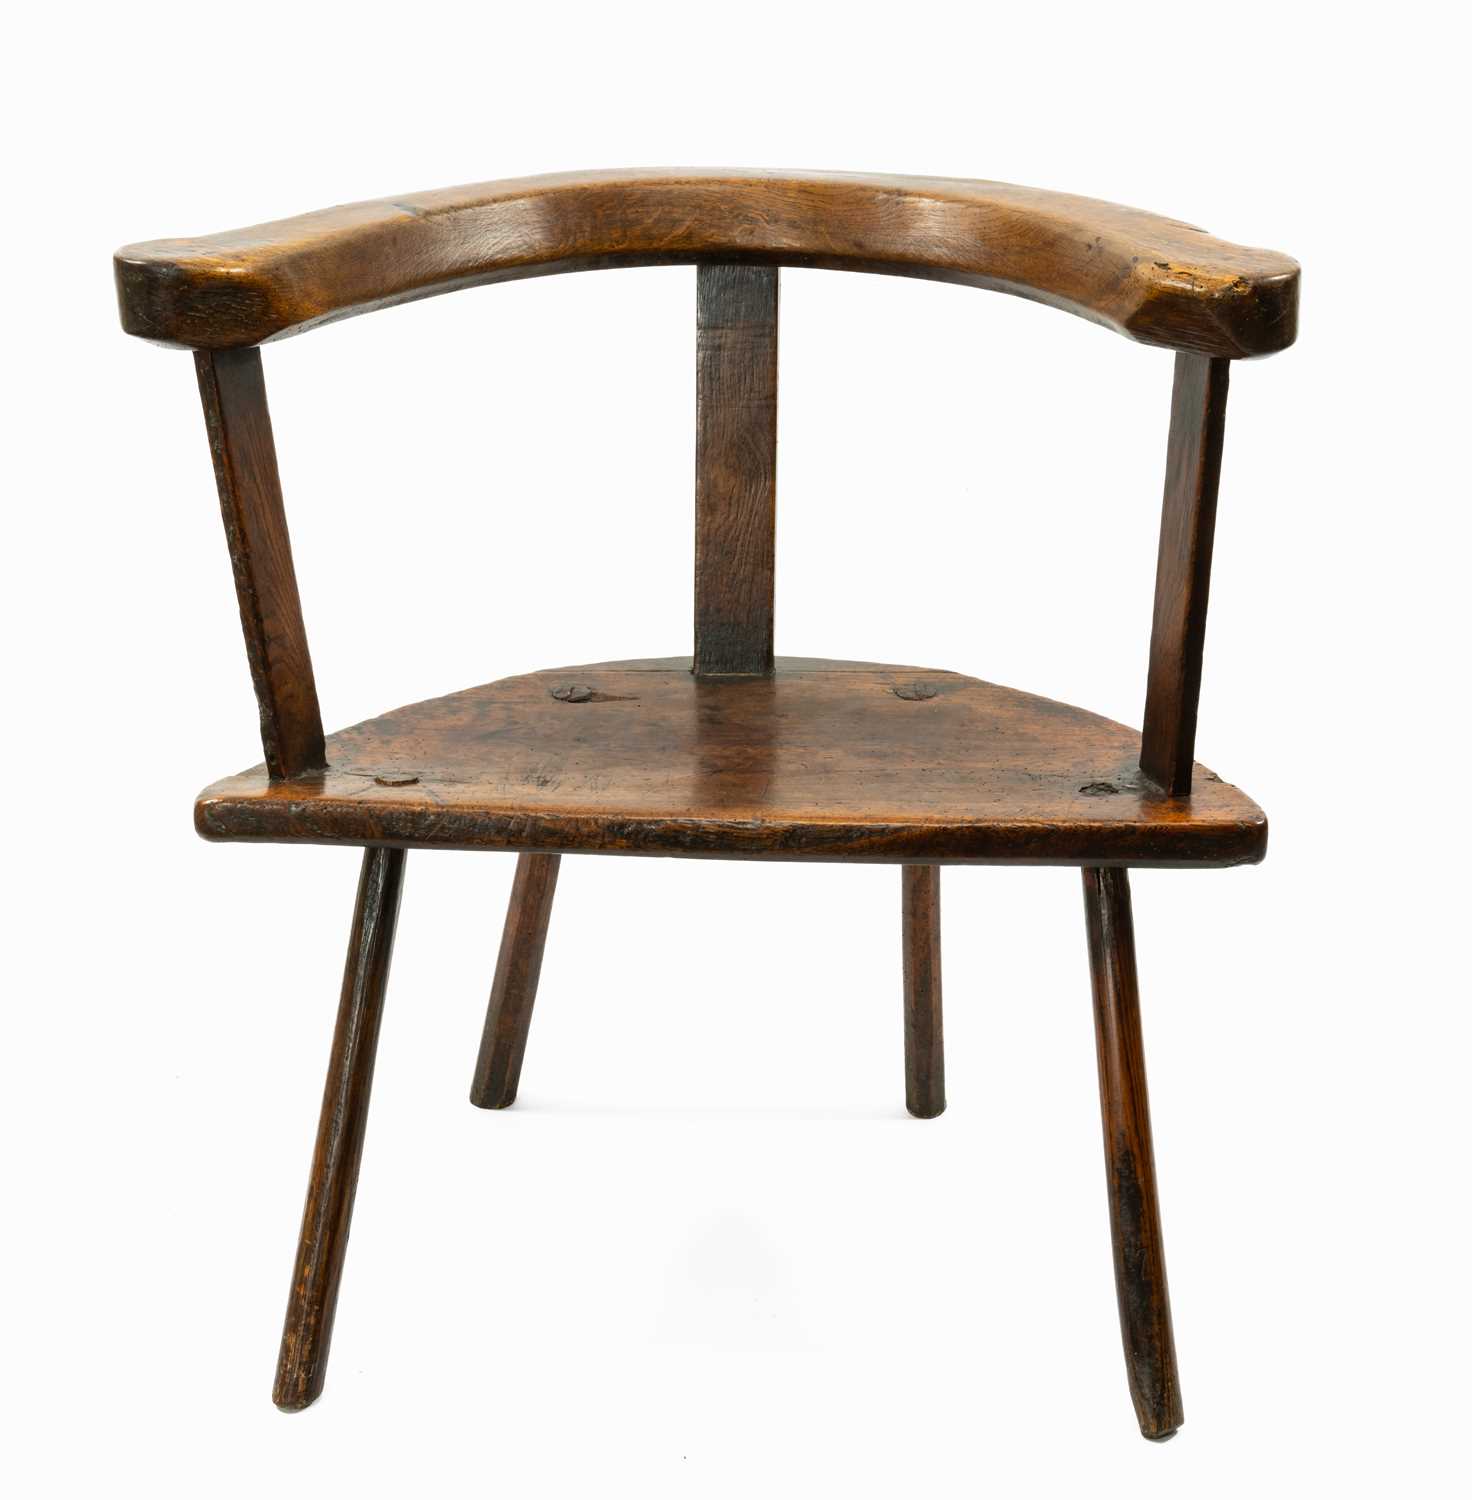 WELSH OAK, ELM & ASH YOKE-BACK CHAIR 18th Century, probably Cardiganshire, thick shaped rail above - Image 2 of 24